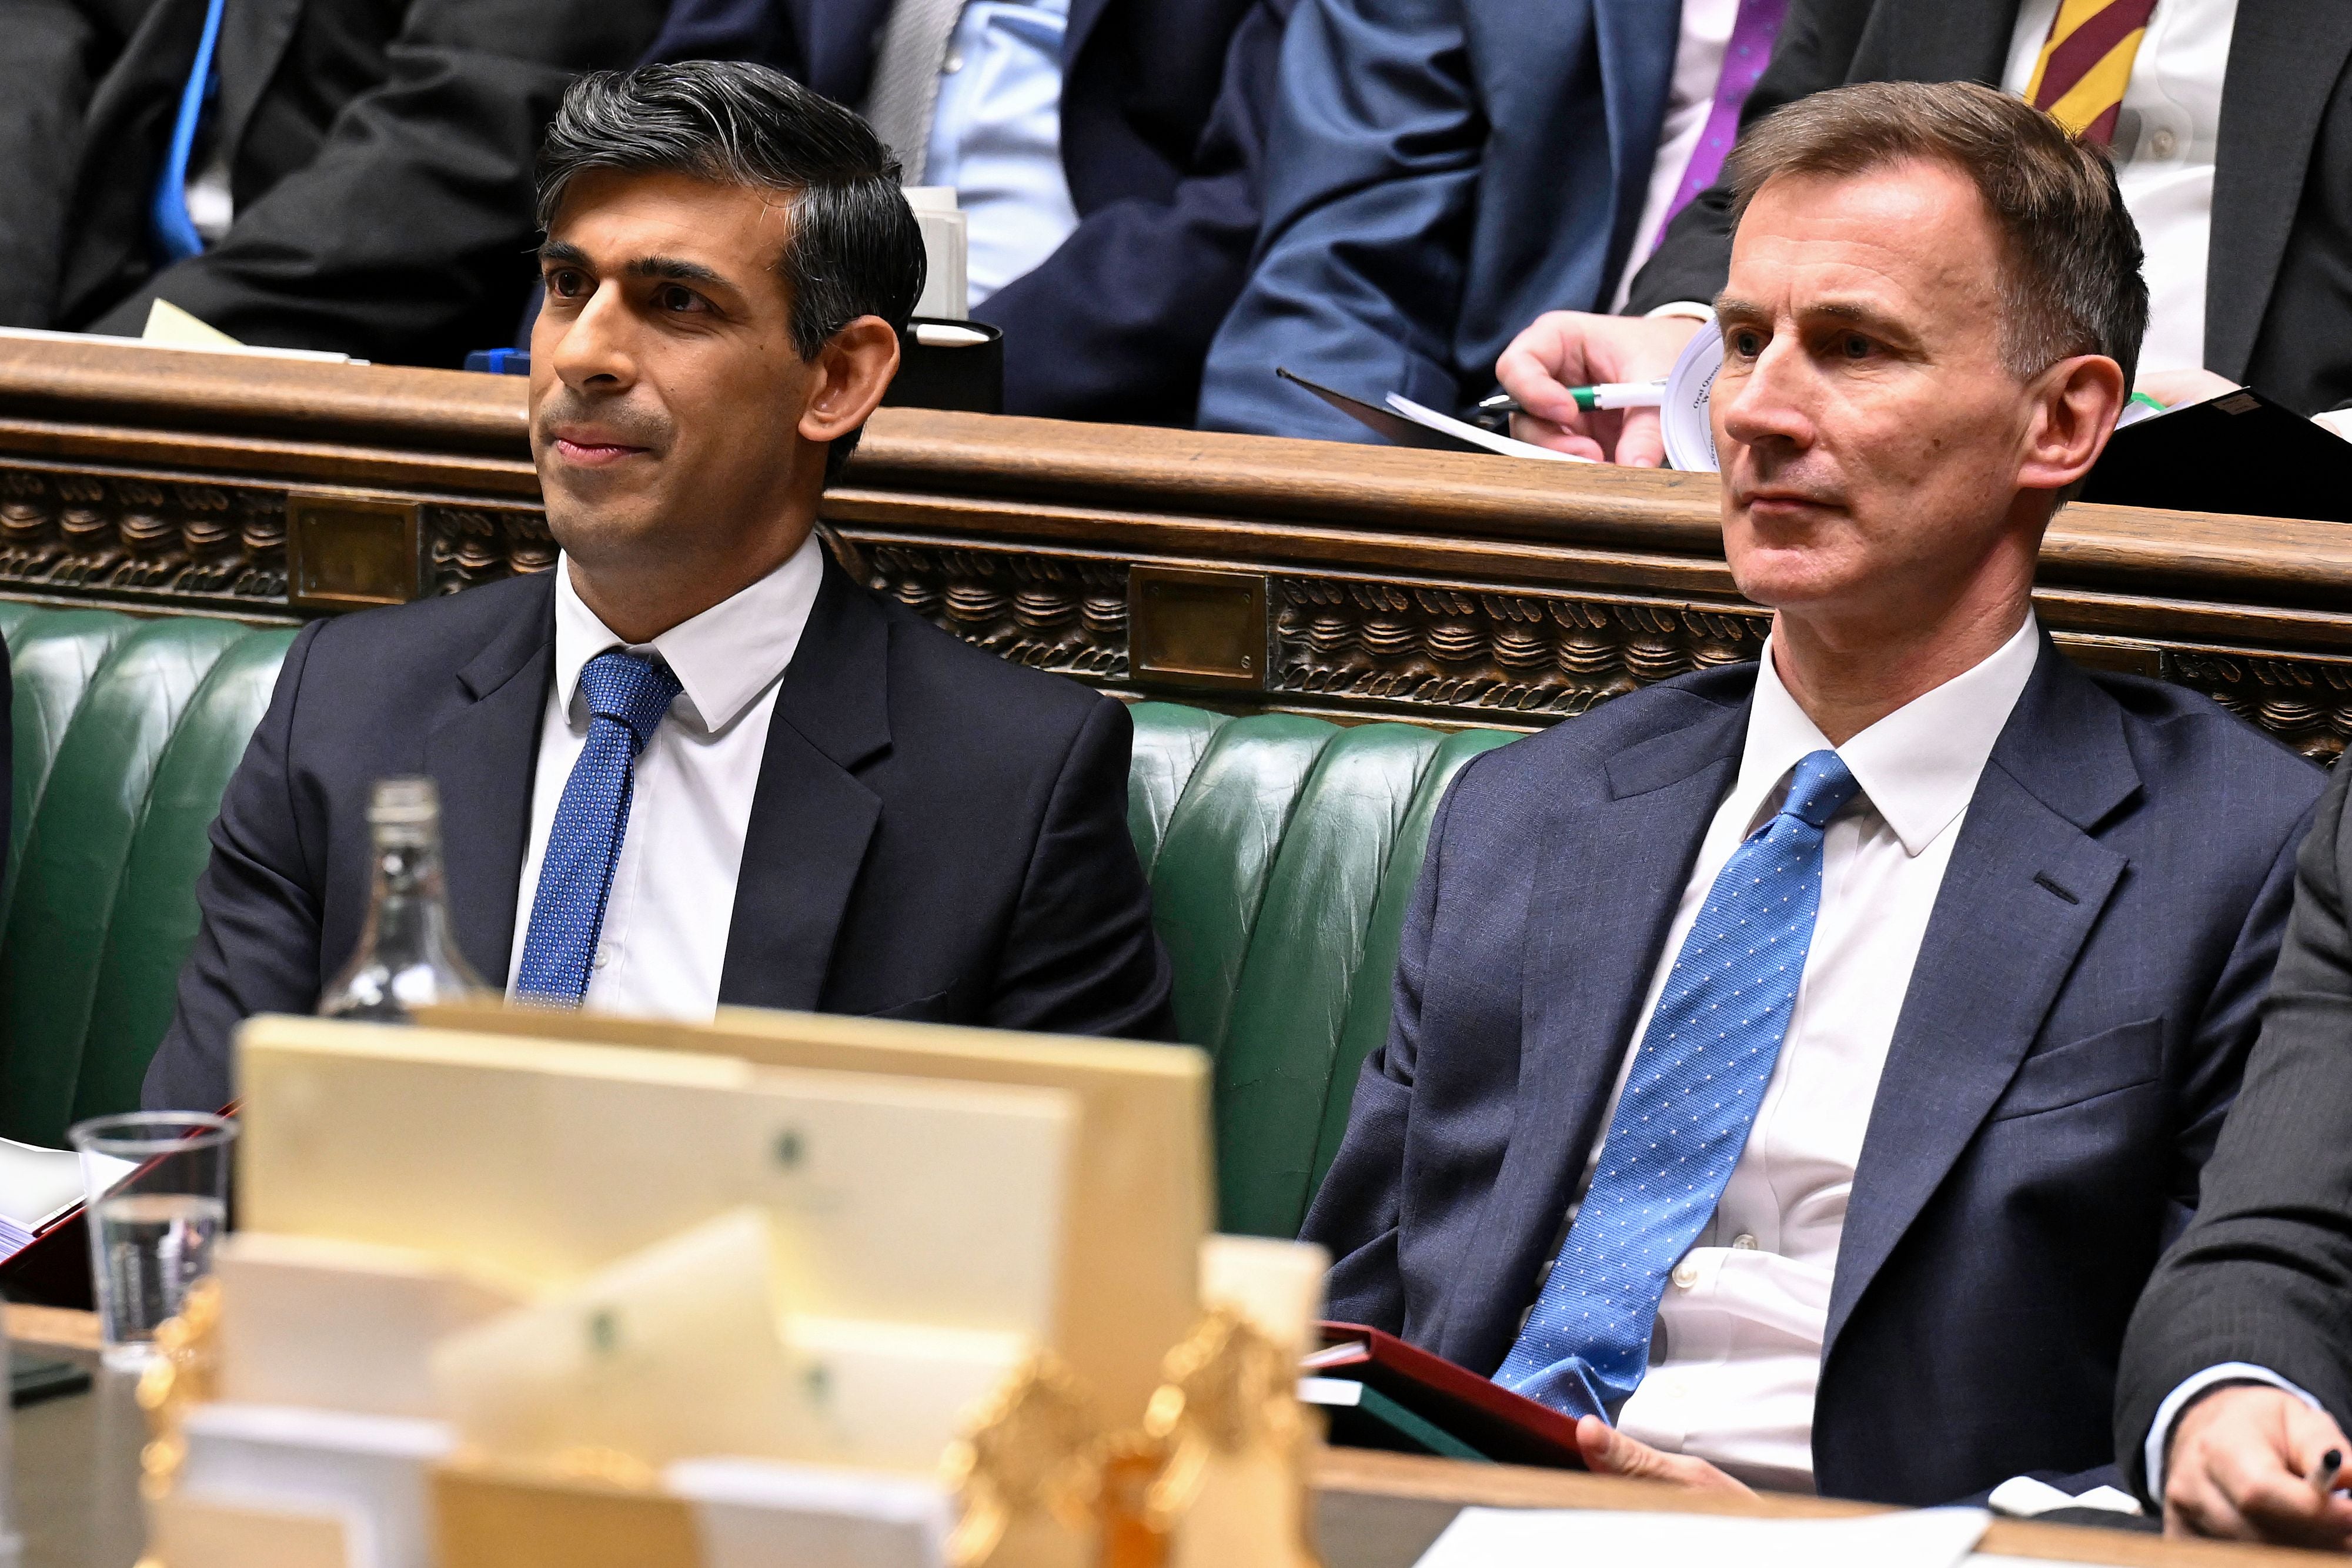 Sunak and Hunt may consider spring election, says George Osborne